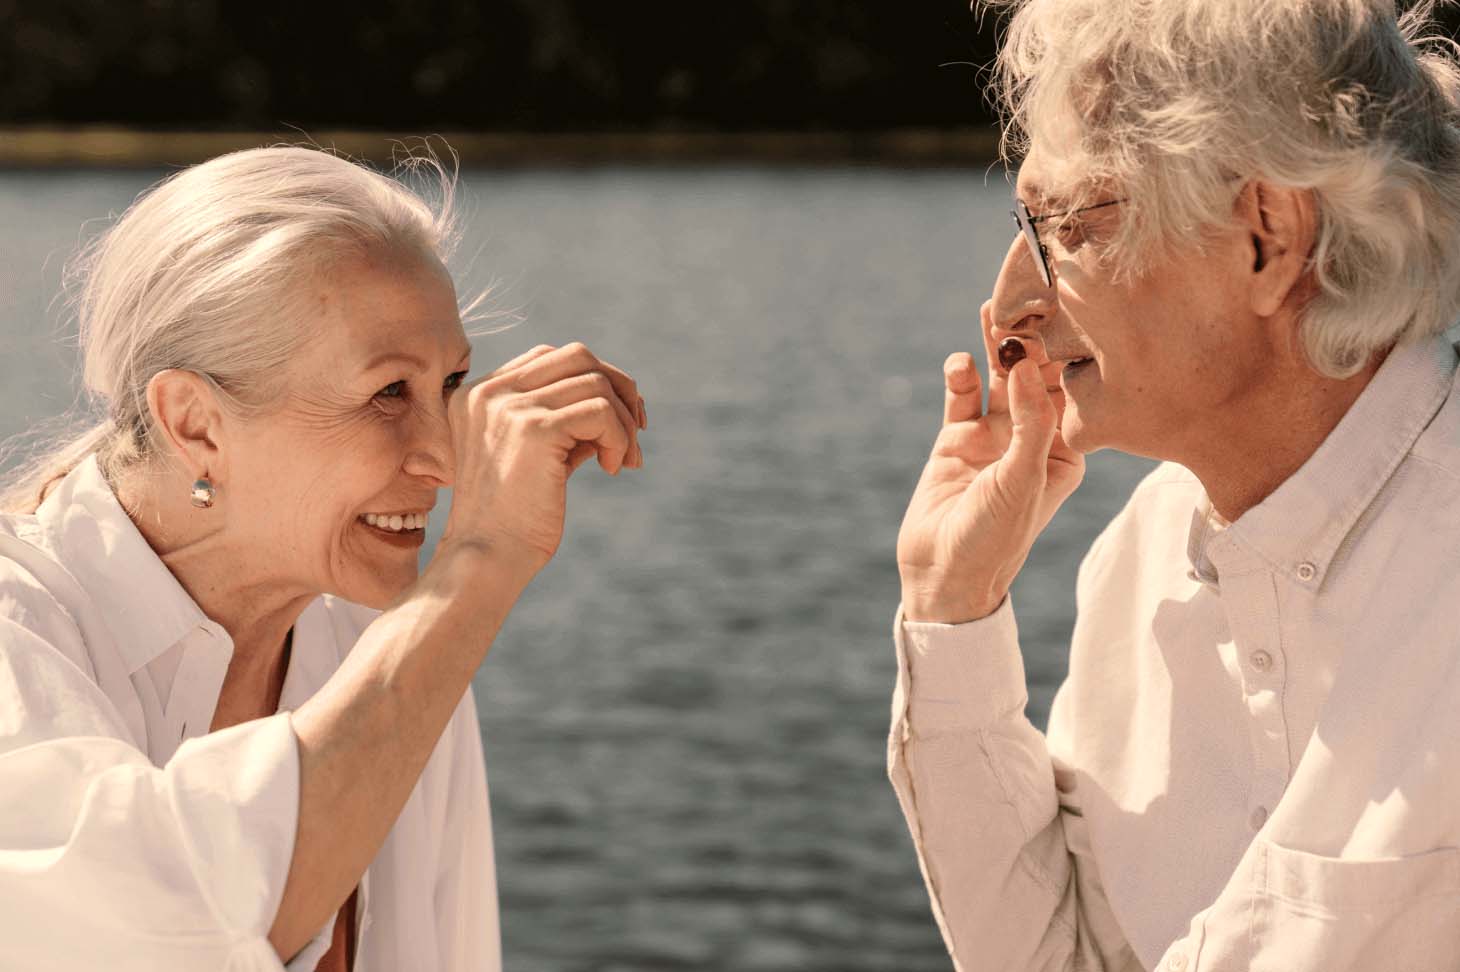 Two elderly people interacting with each other by a lake.